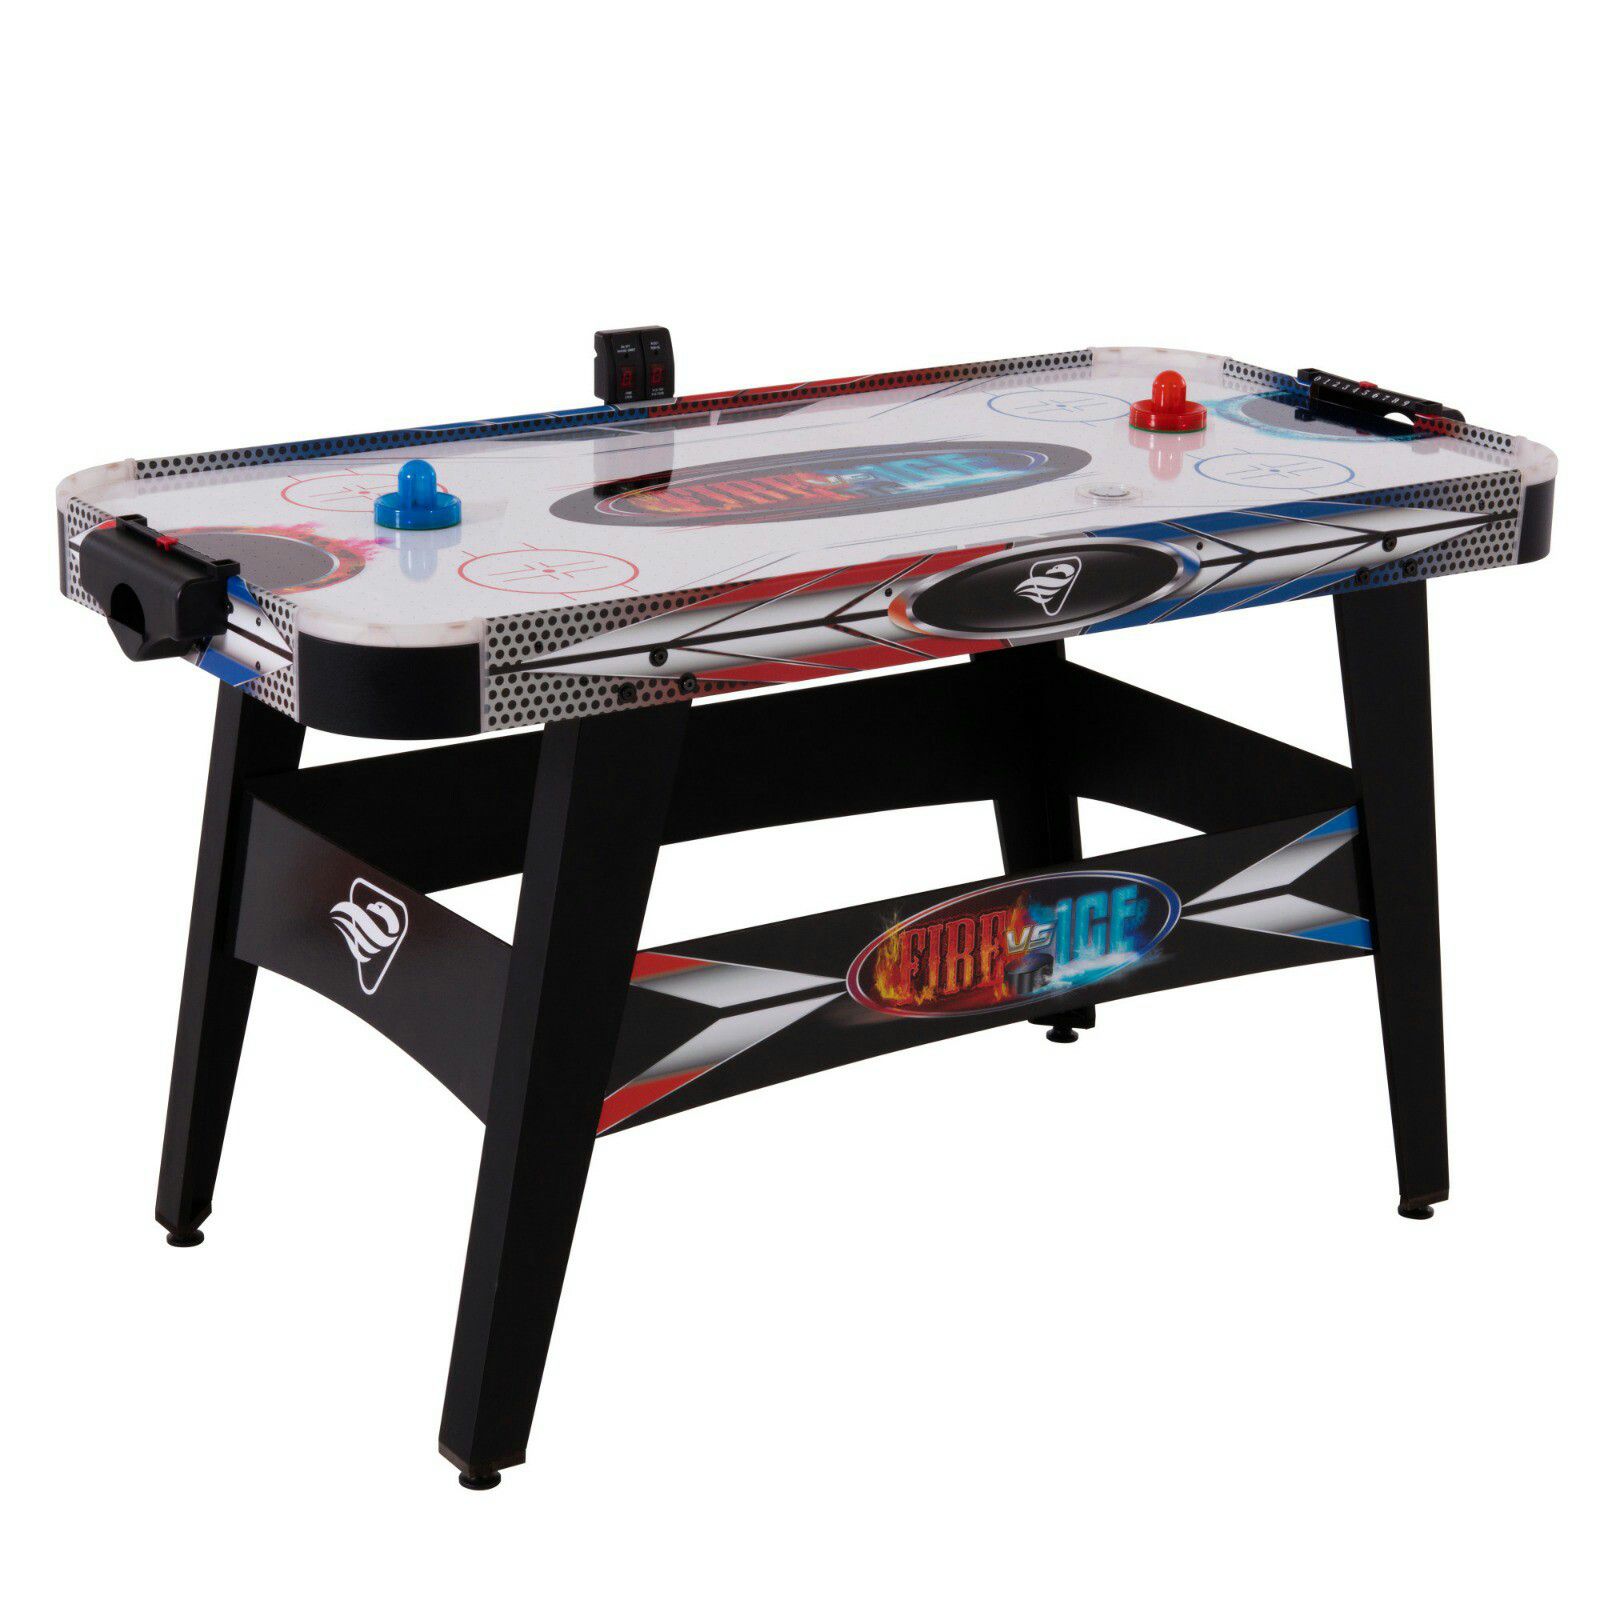 Triumph Fire ‘n Ice LED Light-Up 54" Air Hockey Table Includes 2 LED Hockey Pushers and LED Puck